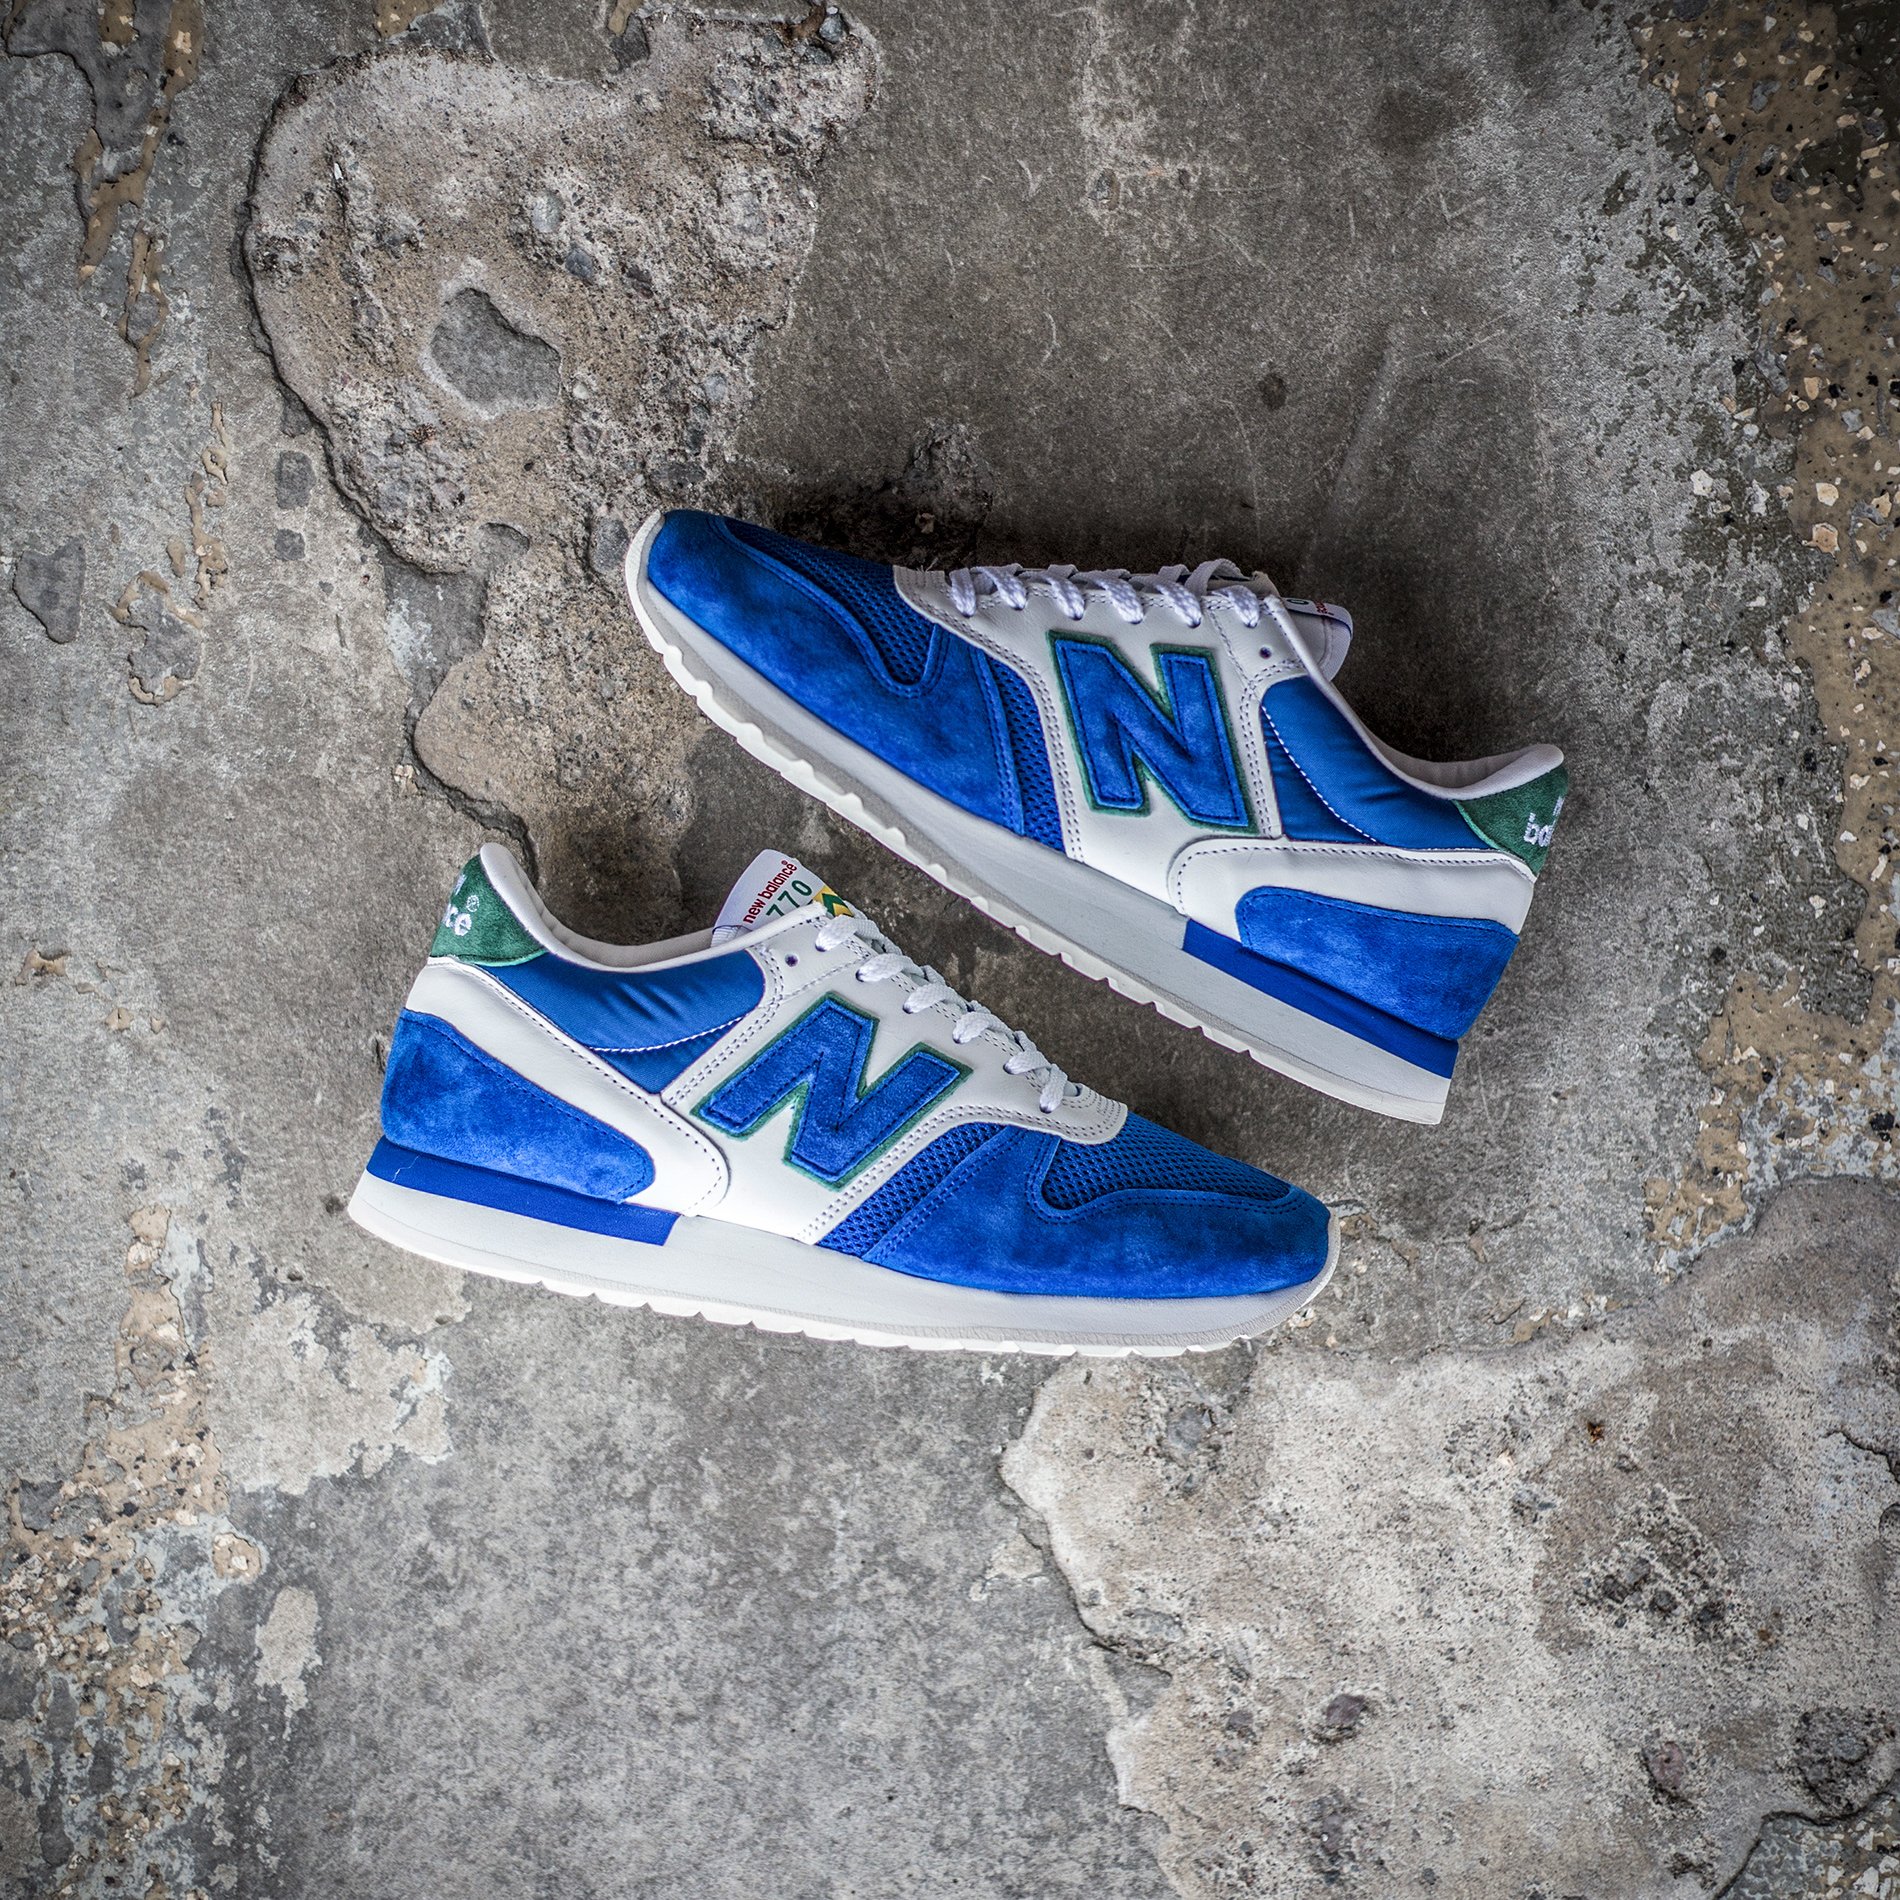 SNS on X: "The New Balance M770CF Made in UK "Cumbrian Flag” is available  to buy online now! — Find your size here: https://t.co/R0R7tCA6Td  https://t.co/1kBTaWab31" / X